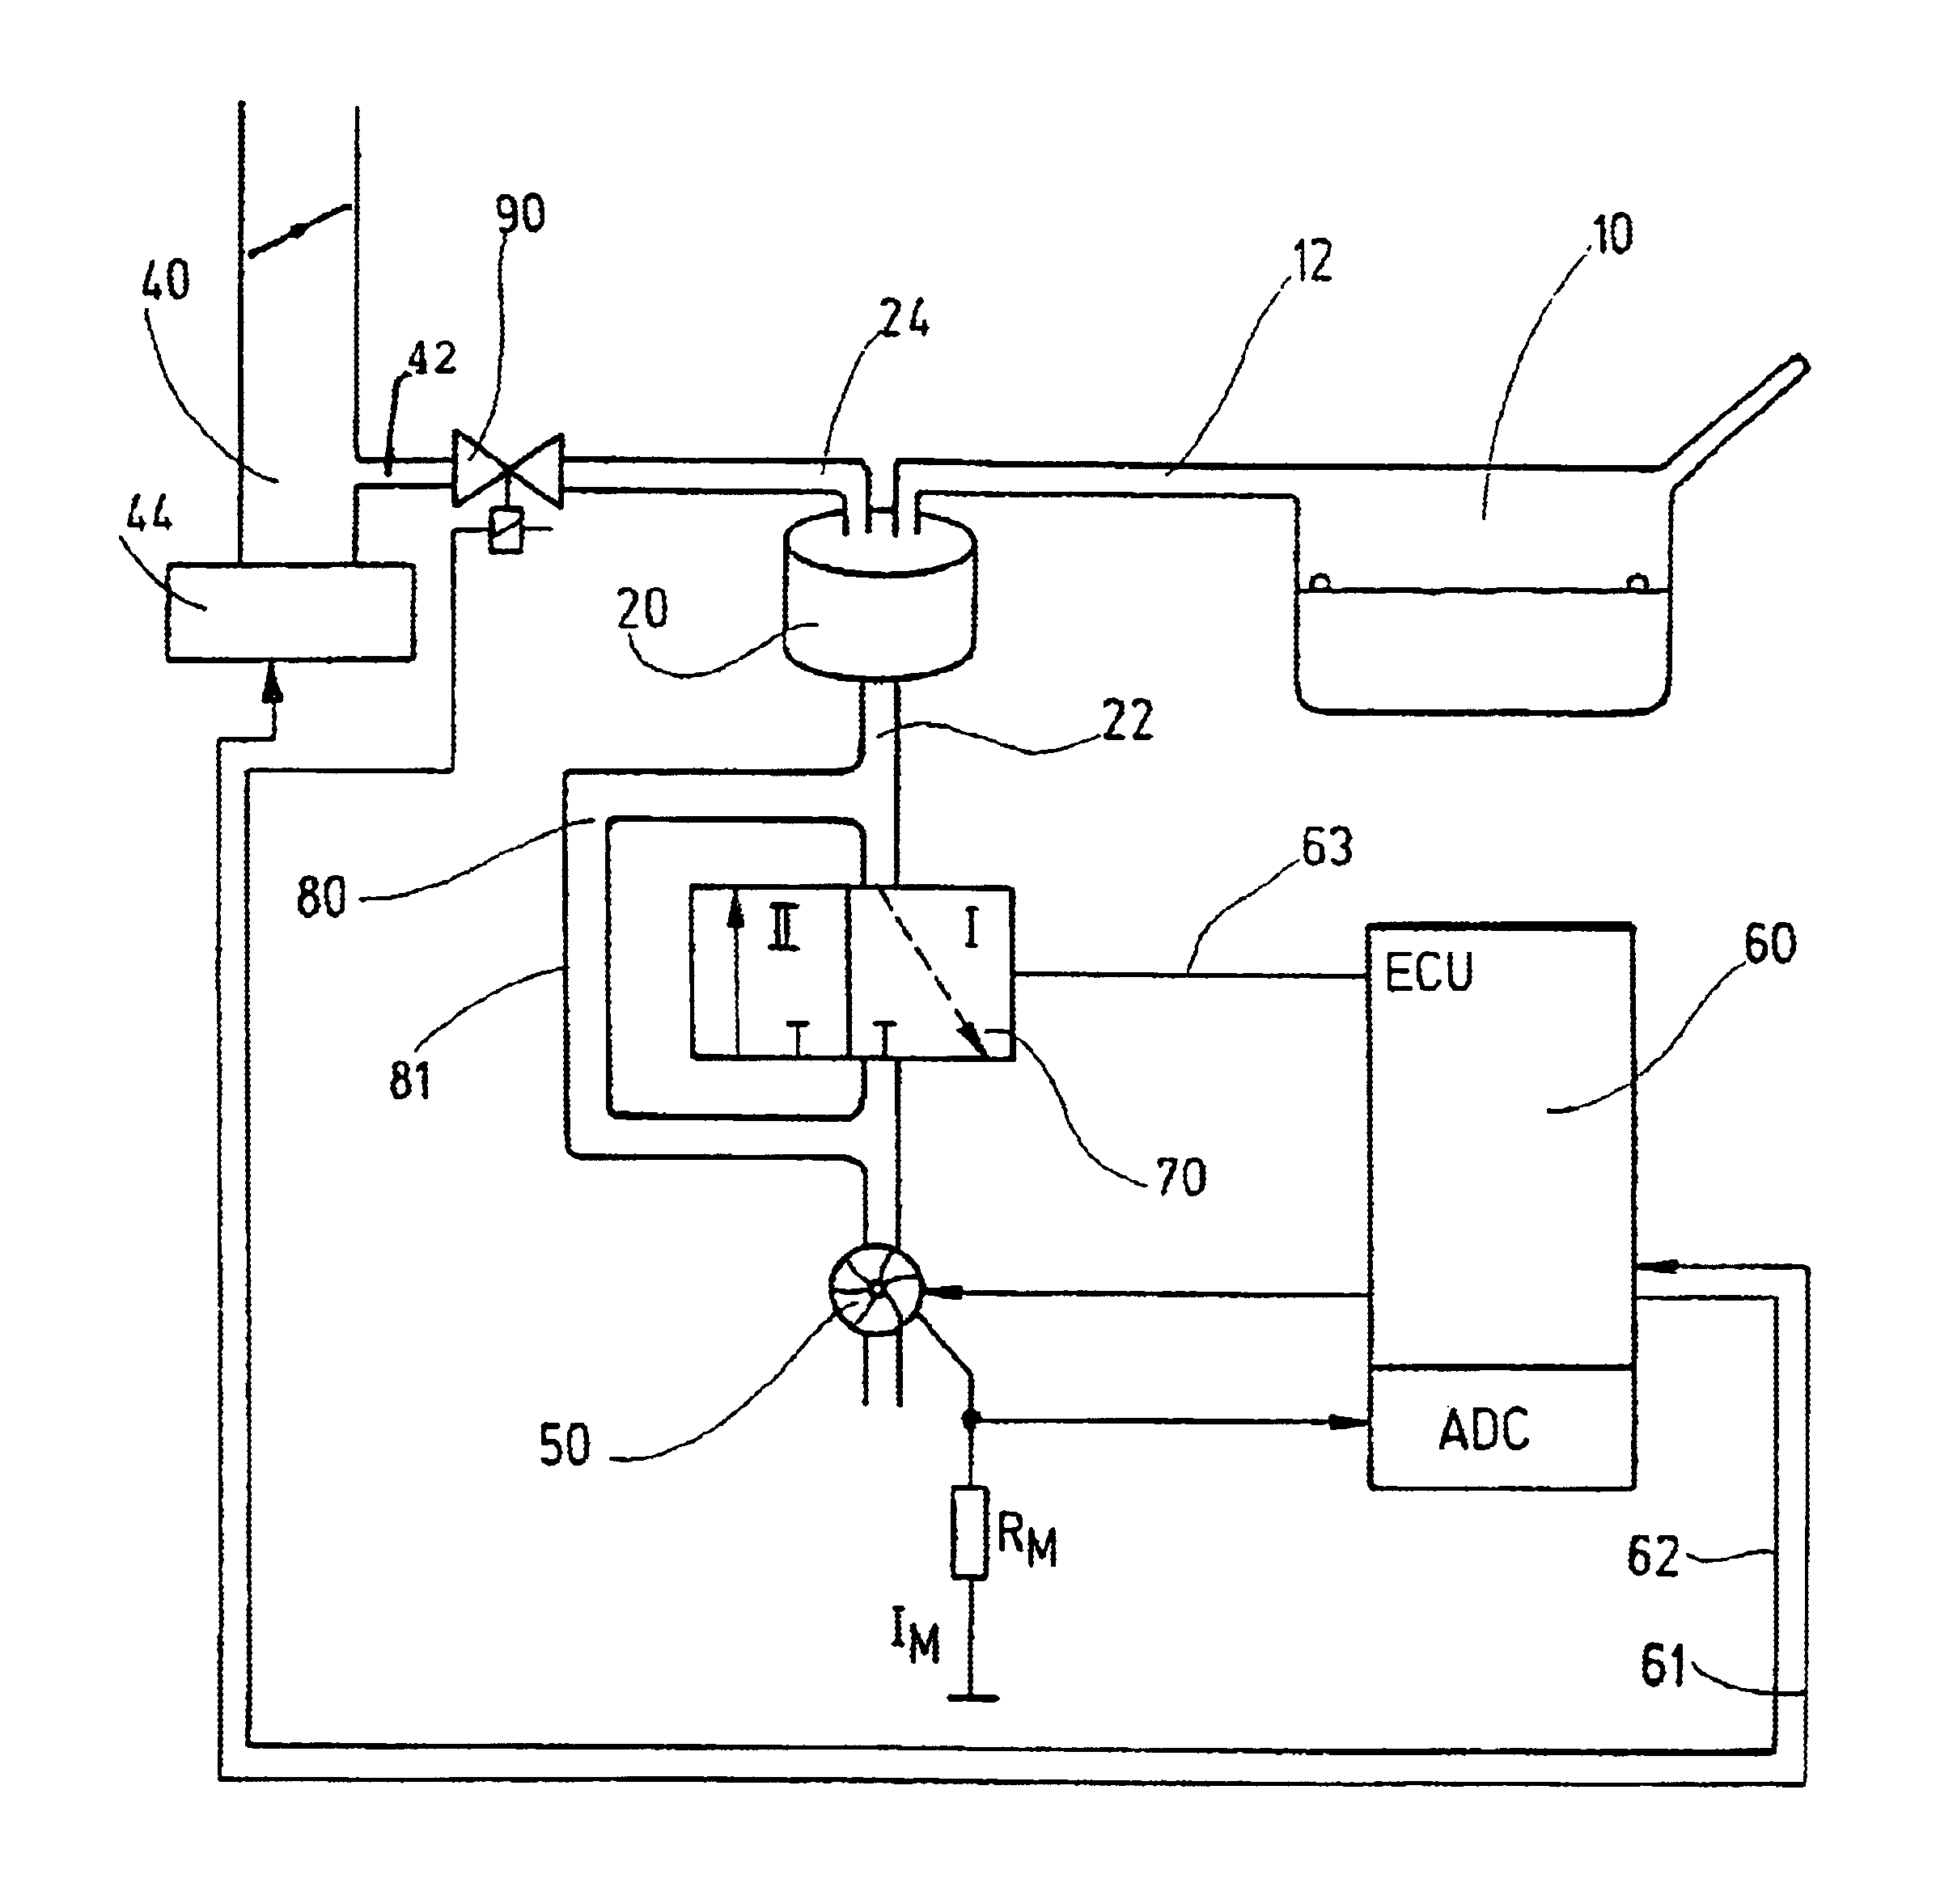 Tank-venting system in a motor vehicle and method for checking the operability of the tank-venting system